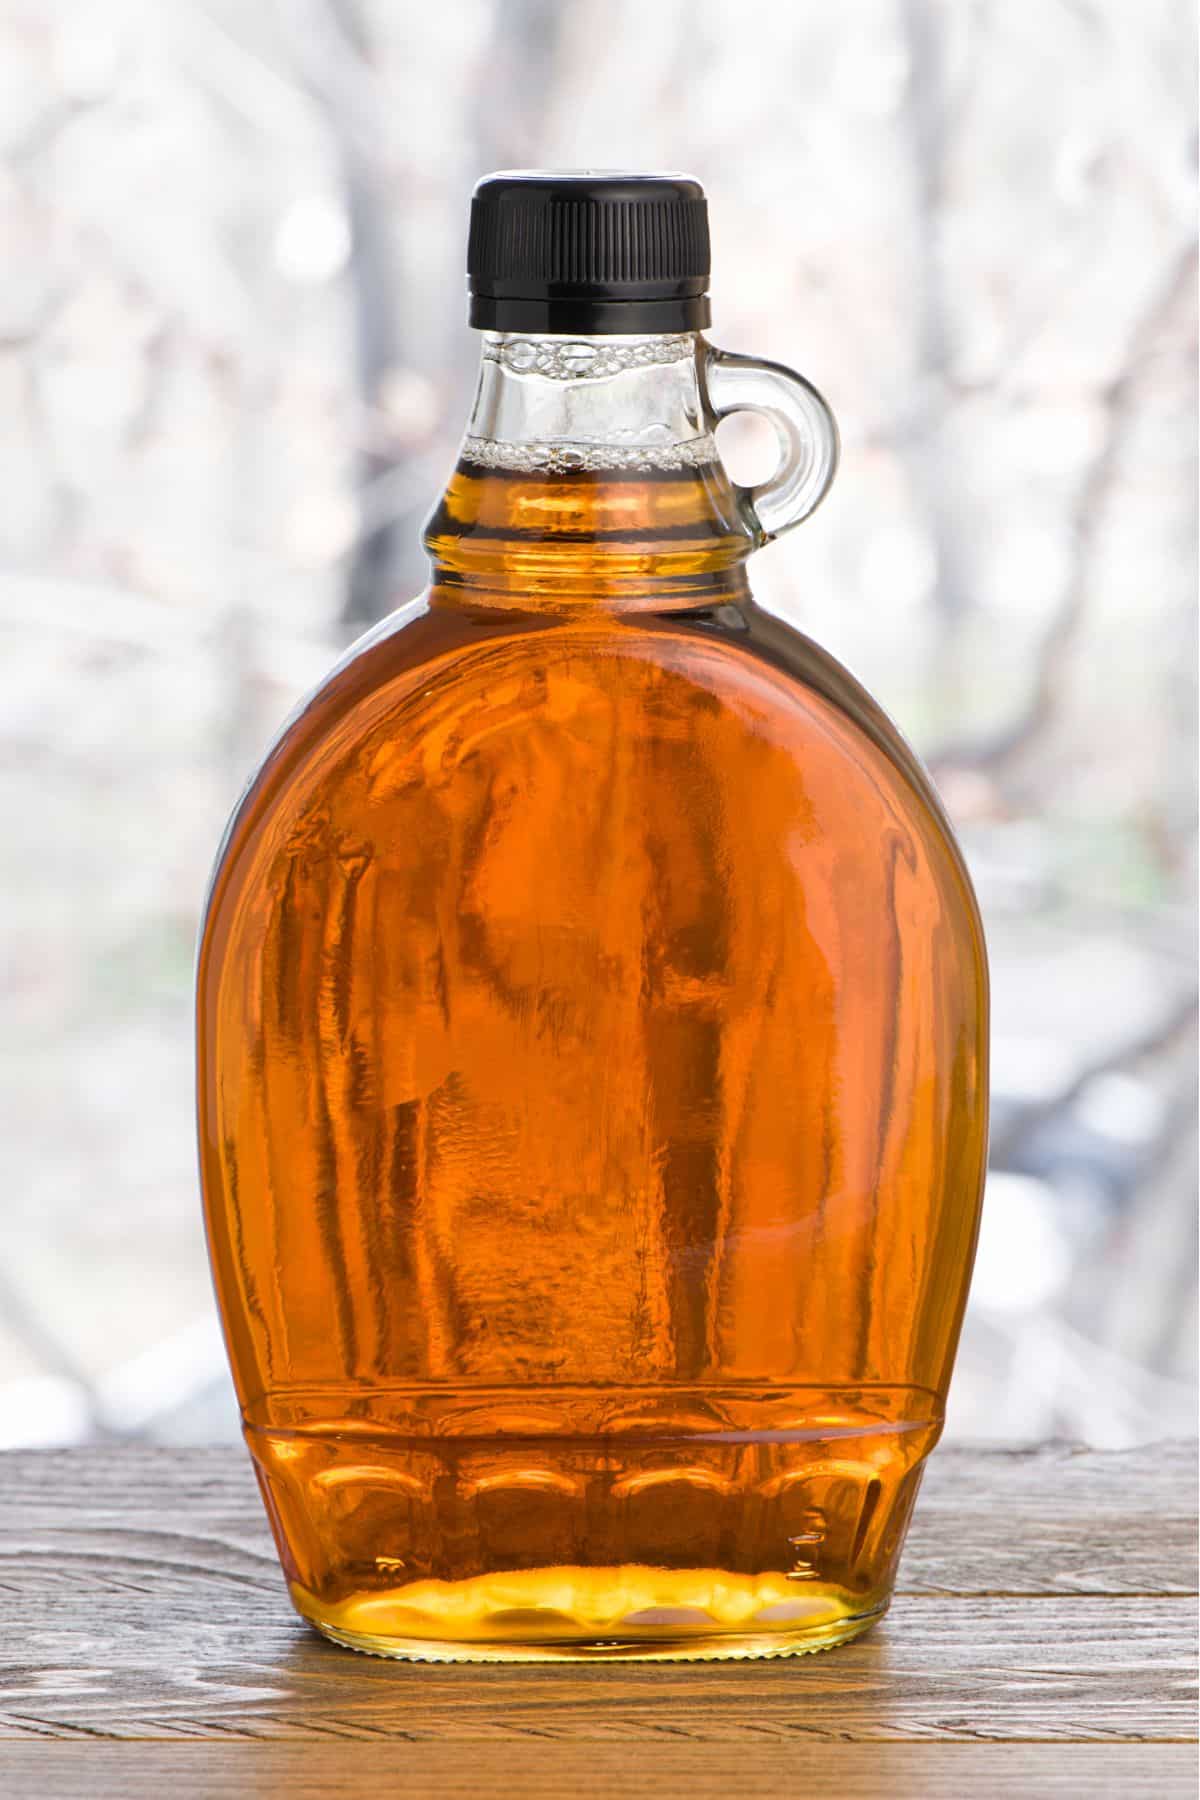 Jar of maple syrup on wooden surface.